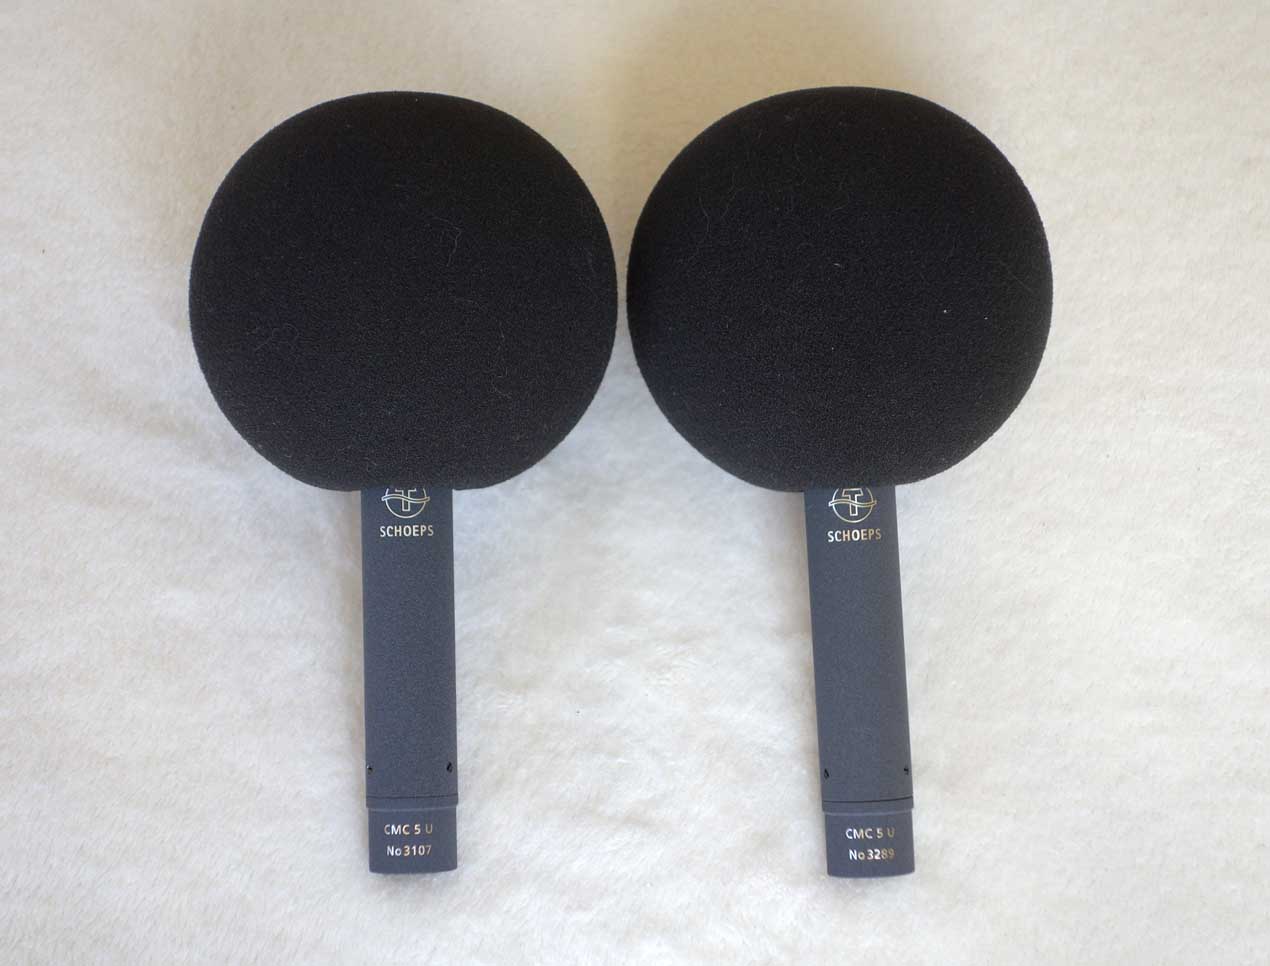 Factory Refurbished Schoeps MK3 Matched Pair Diffuse-Field Omni Capsules